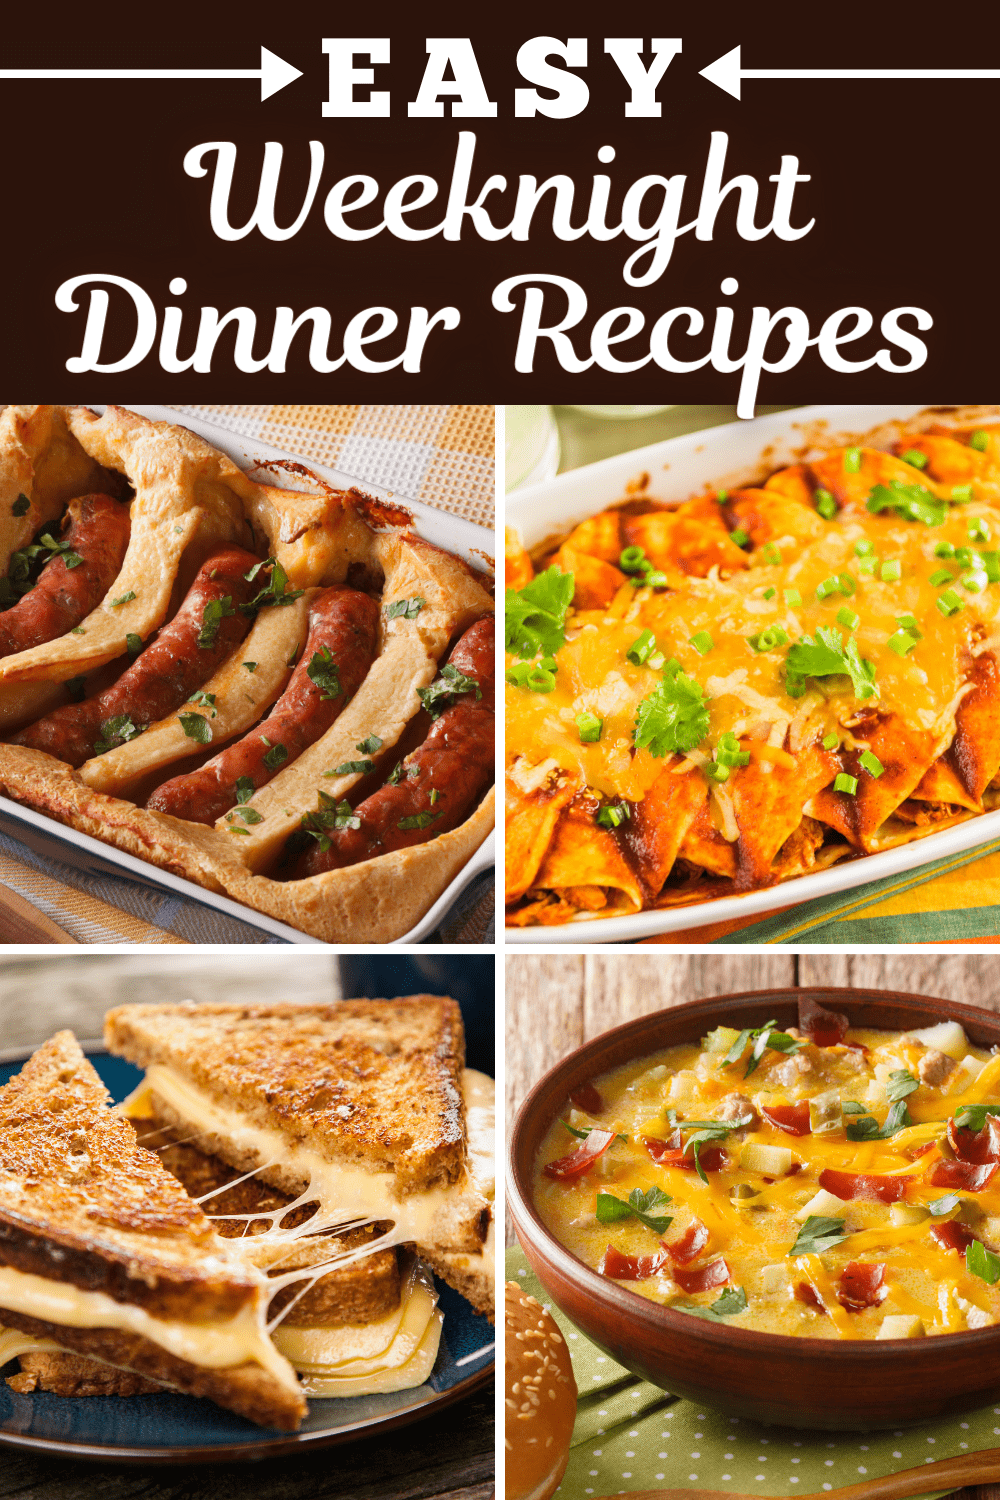 24 Fun Weeknight Dinners (+ Easy Recipes) - Insanely Good